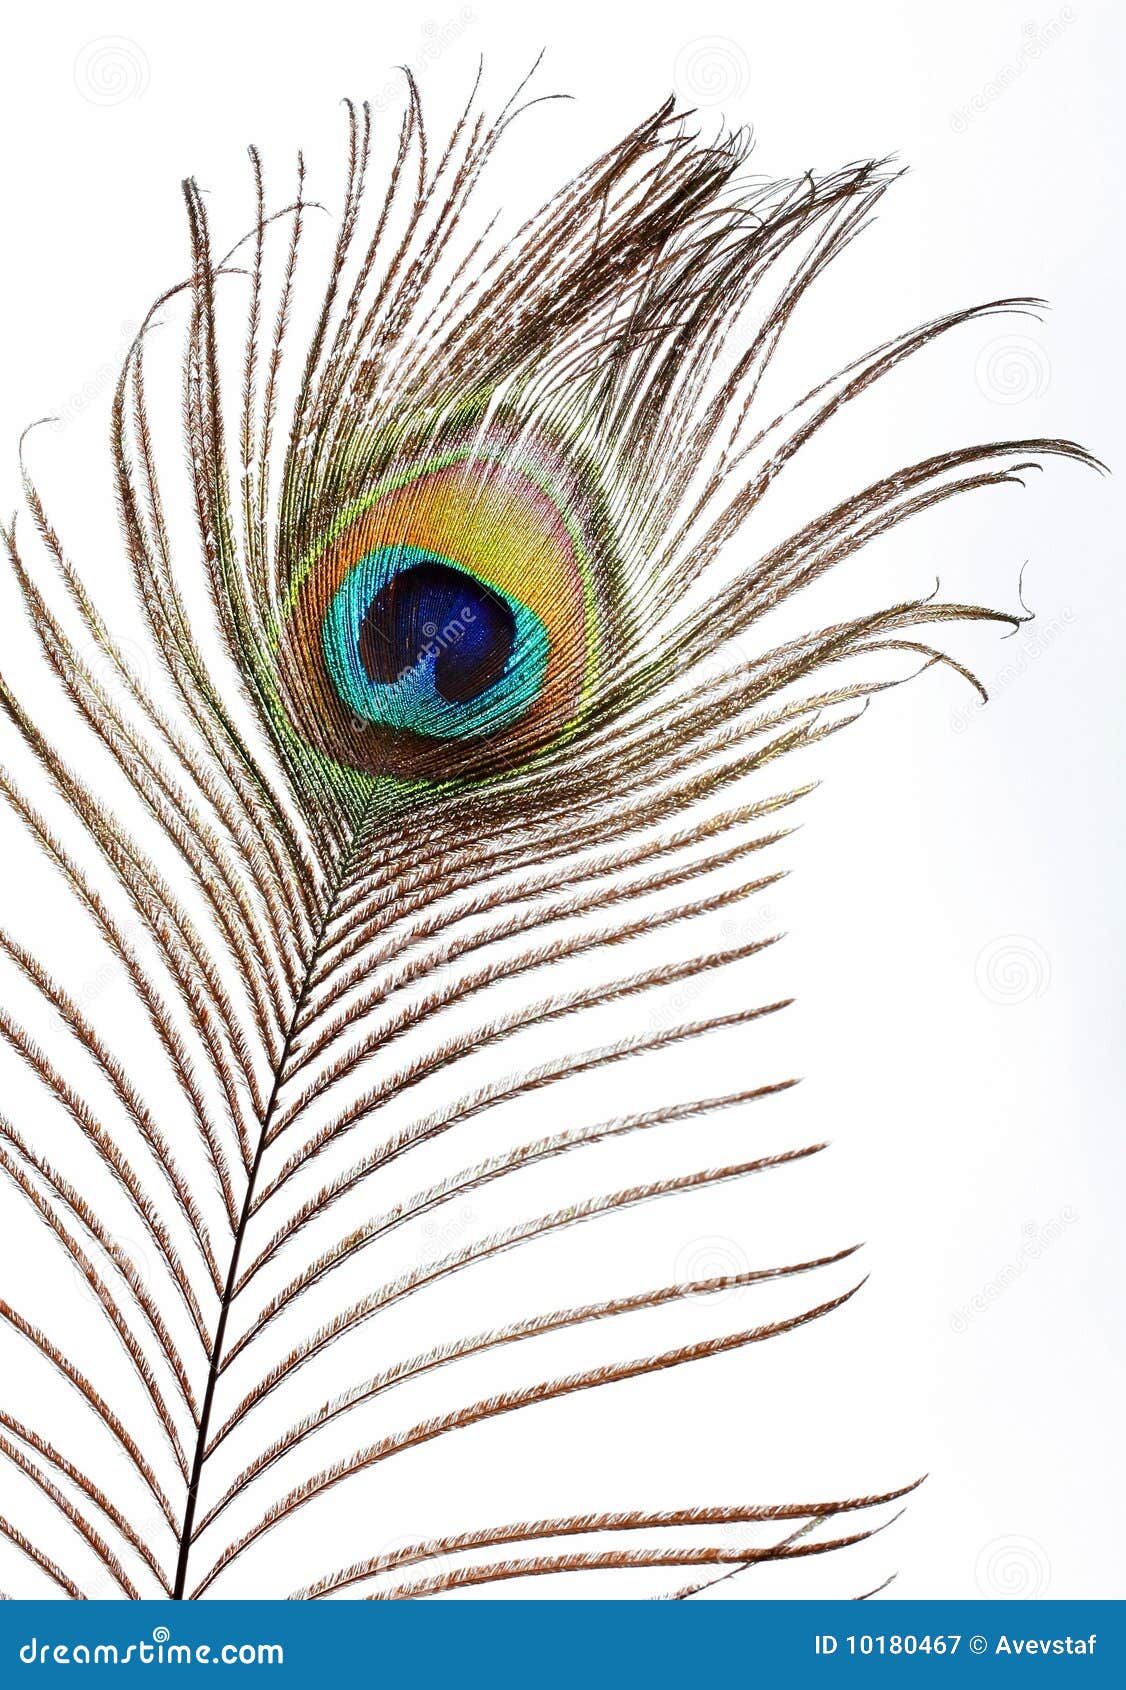 The peacock eye stock image. Image of beauty, feather - 10180467